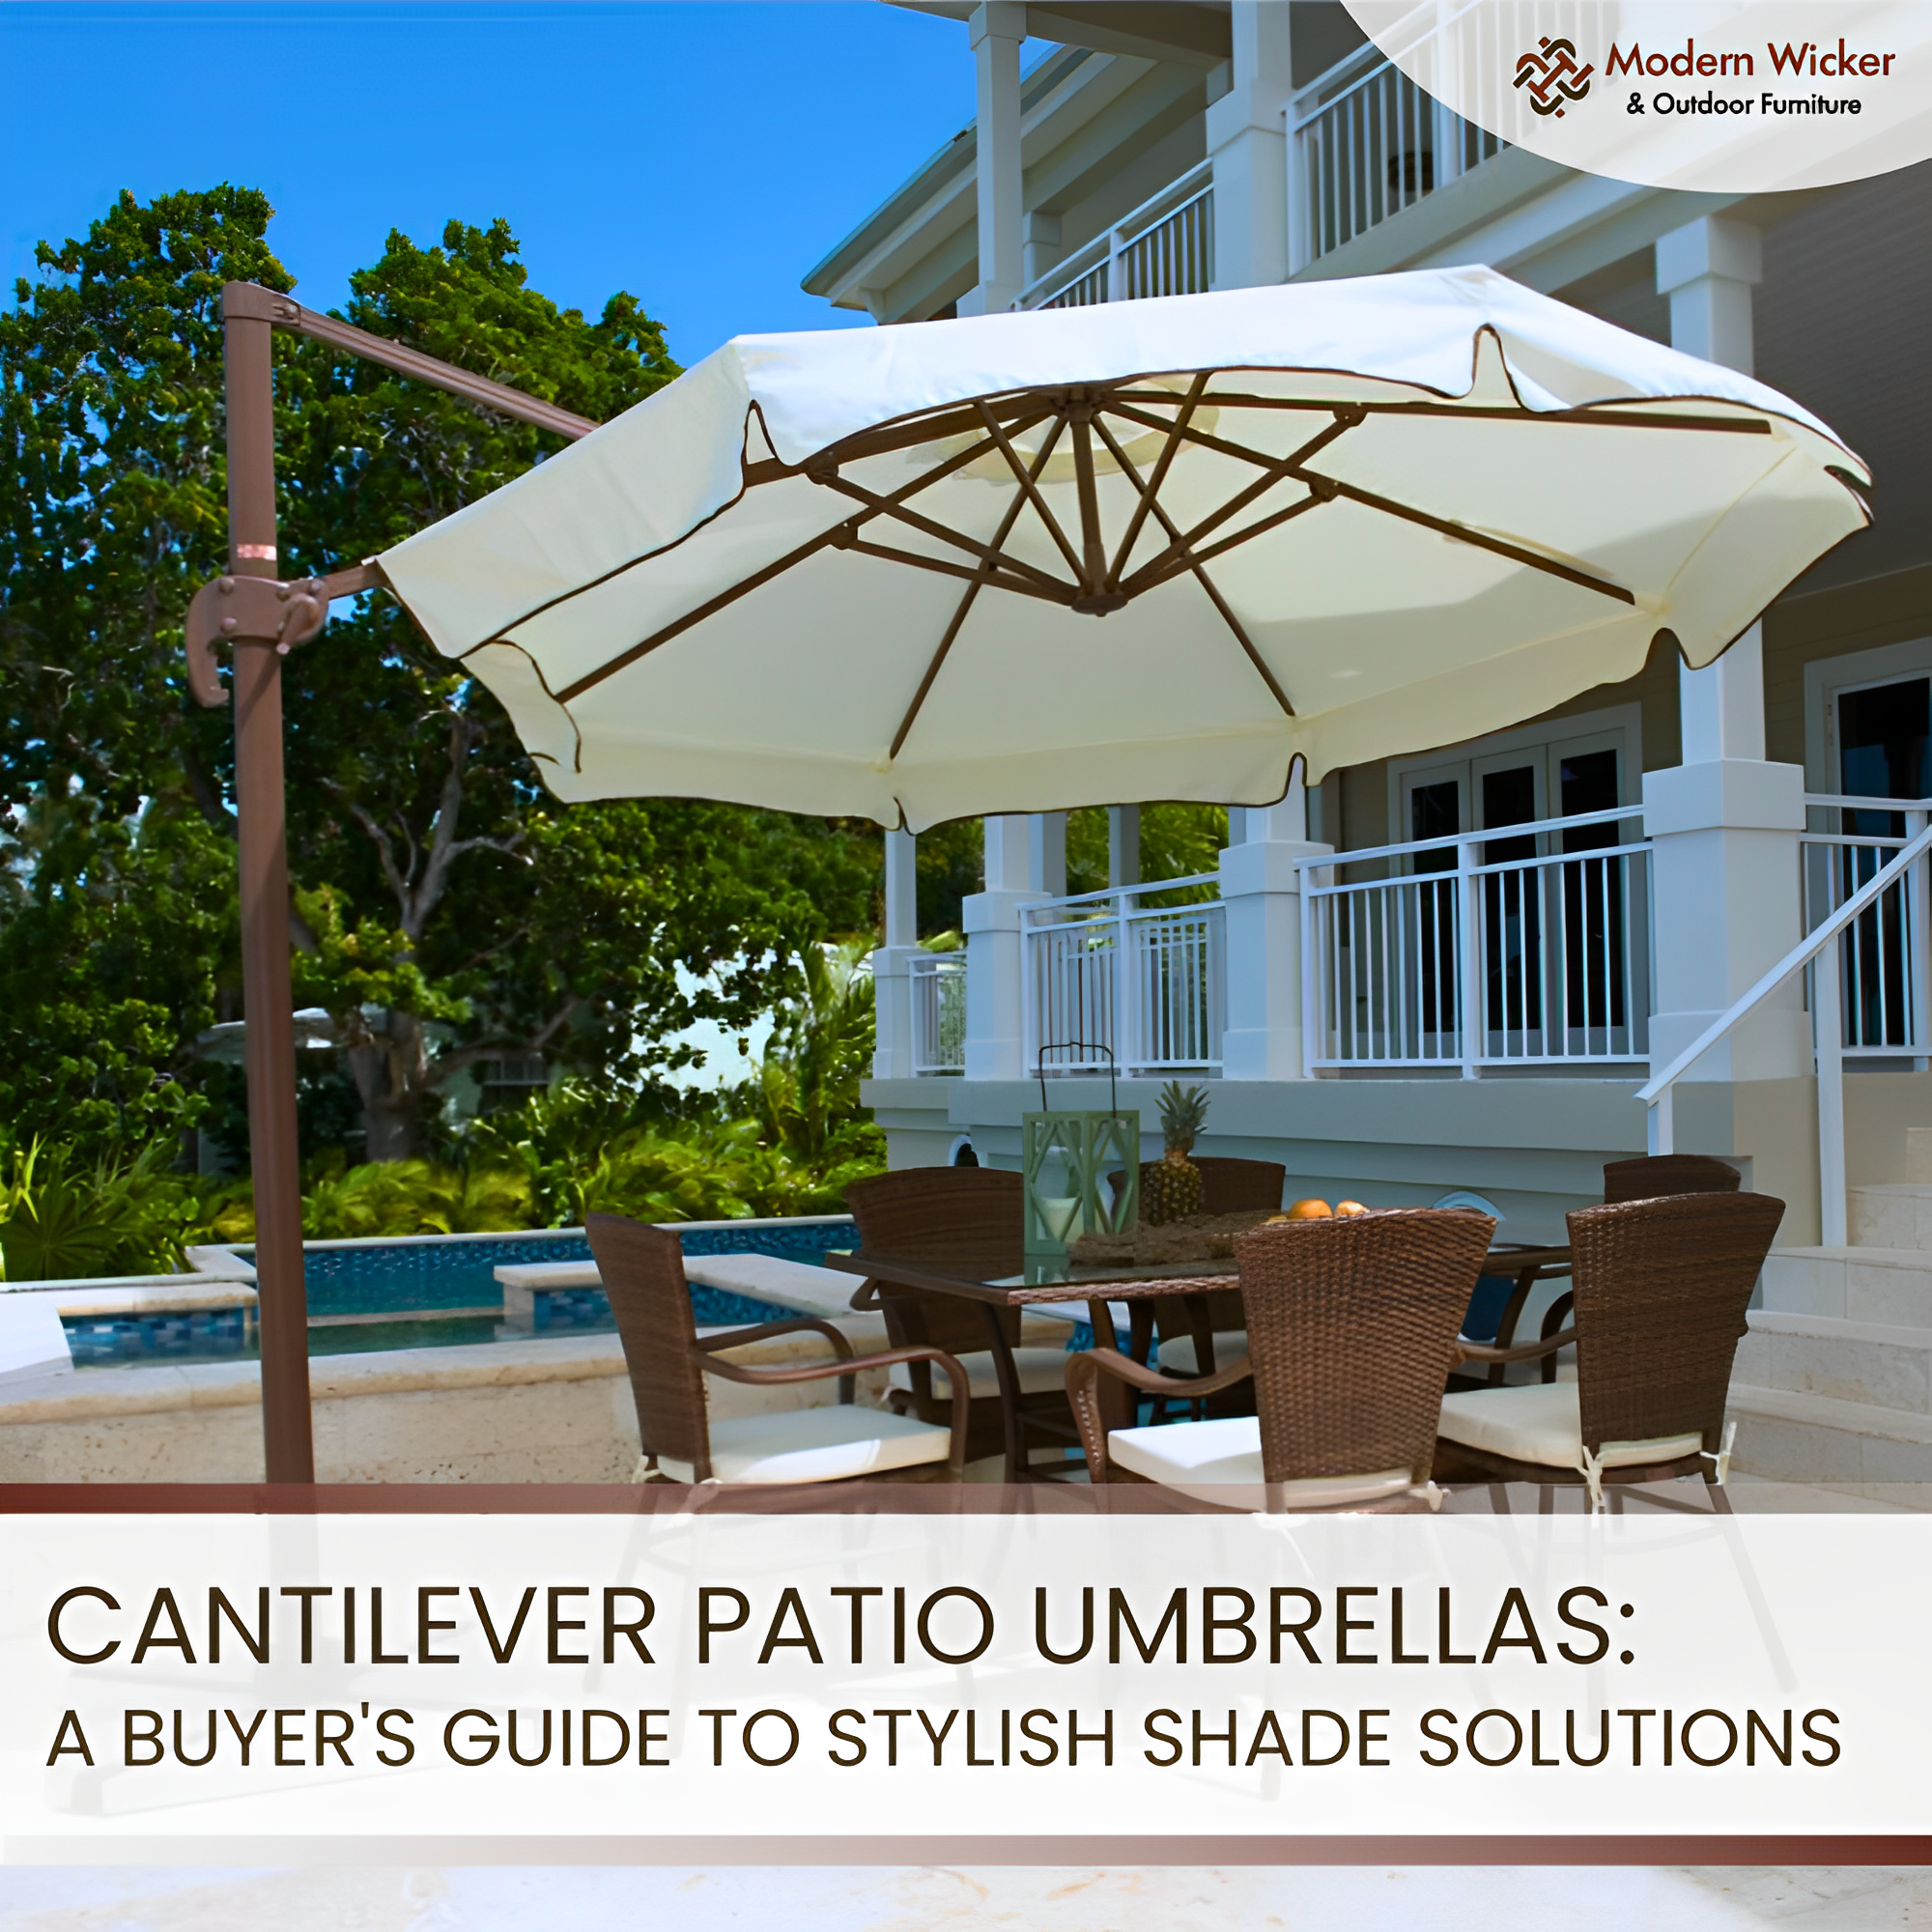 Cantilever Patio Umbrellas: A Guide to Stylish Shade Solutions